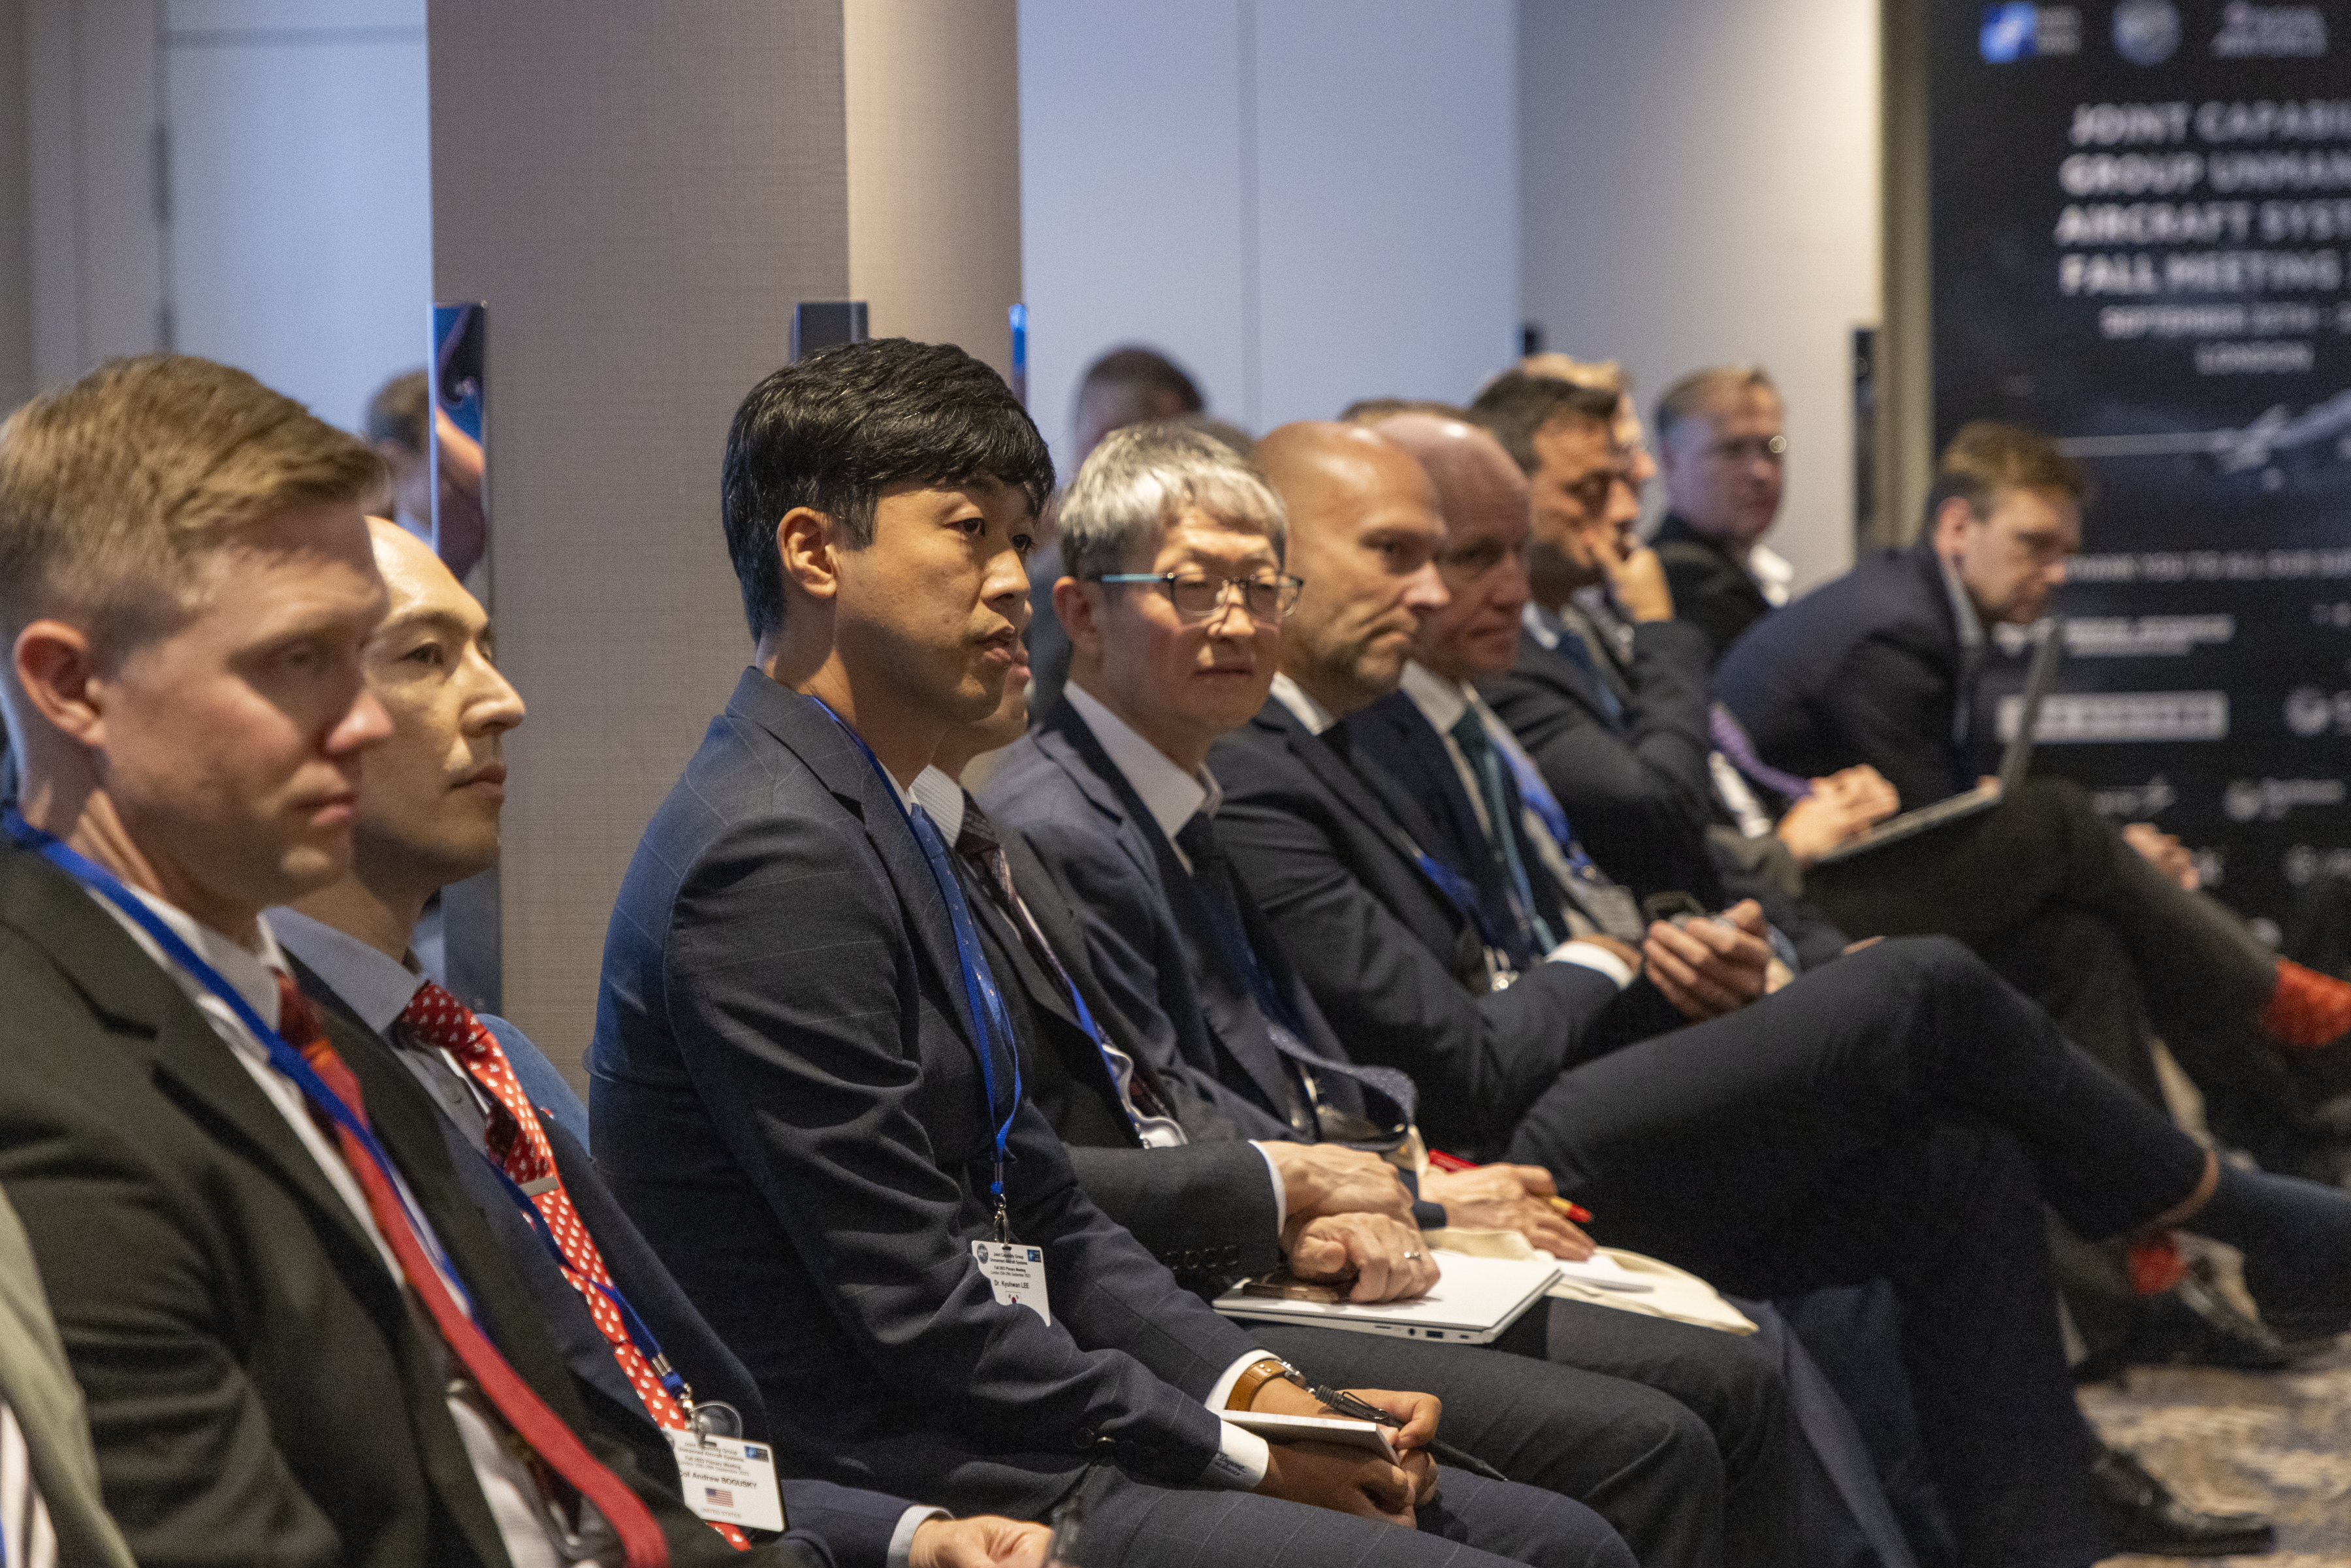 Representatives from Republic of Korea listening to the discussions